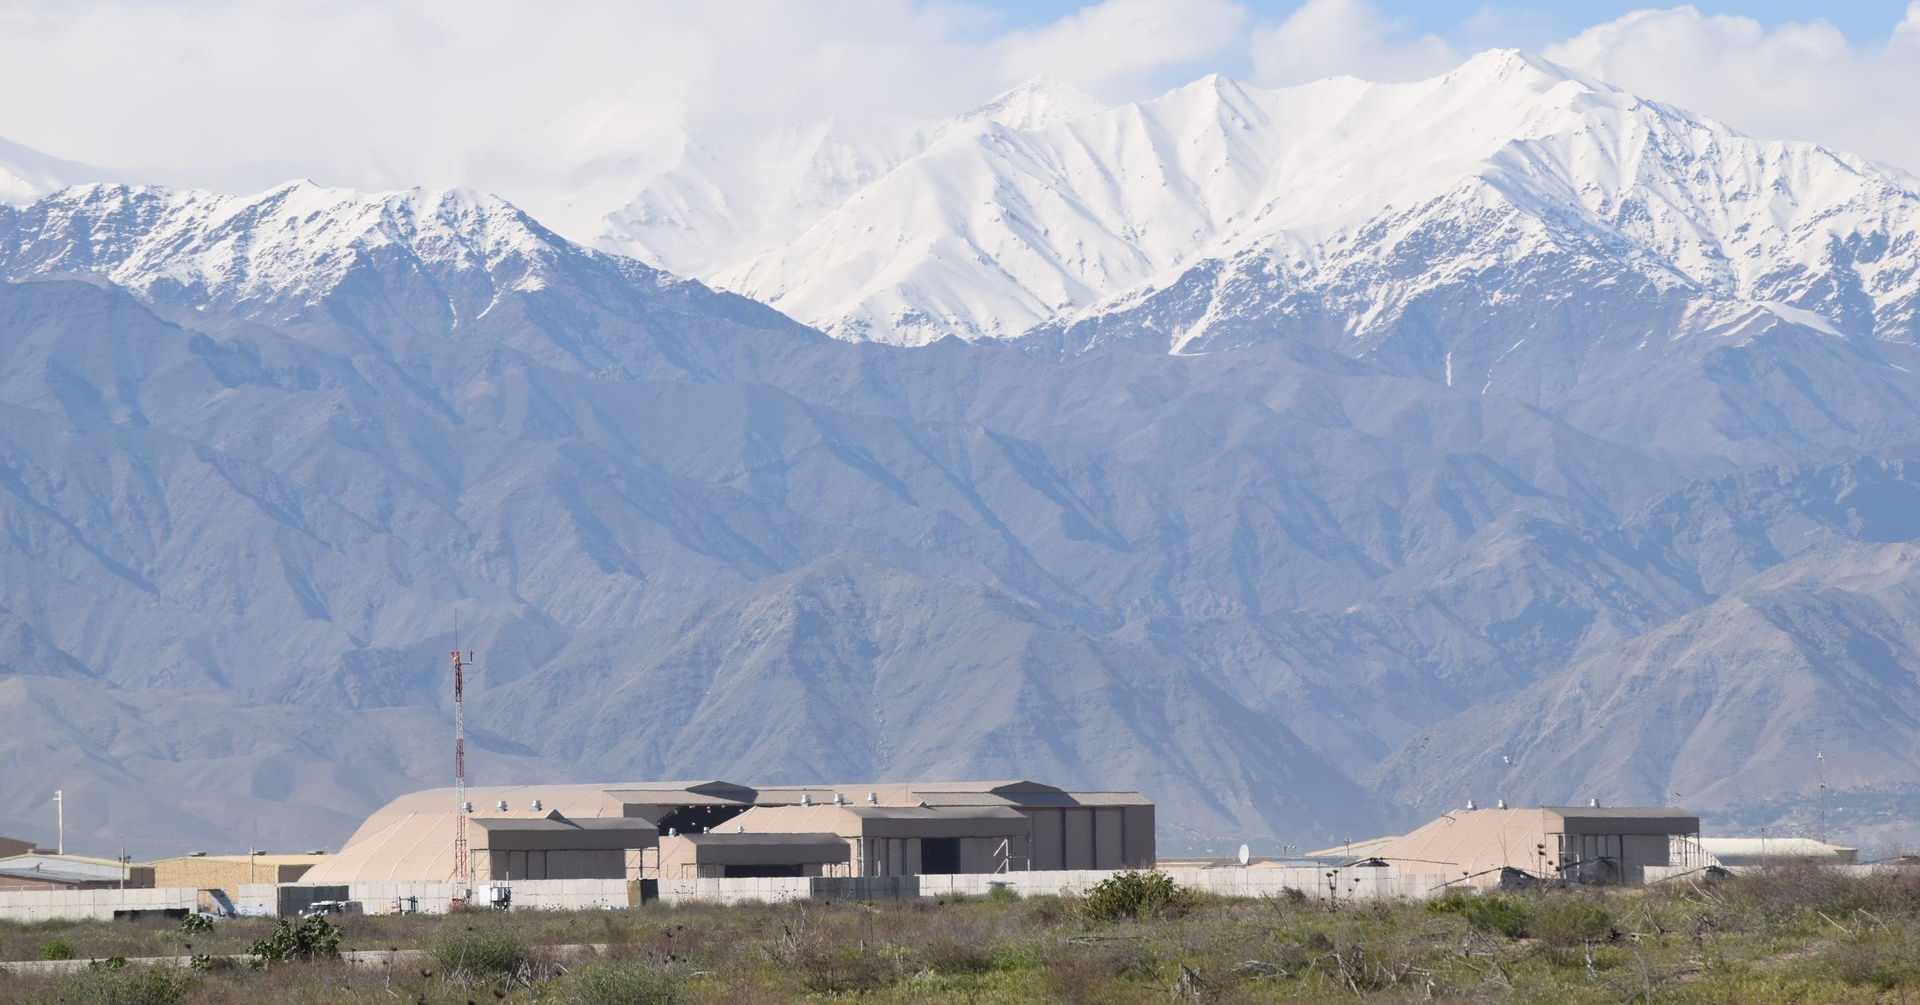 Image of Bagram, Afghanistan. The air base is visible in the foreground, with the Hindu Kush mountain range in the background.